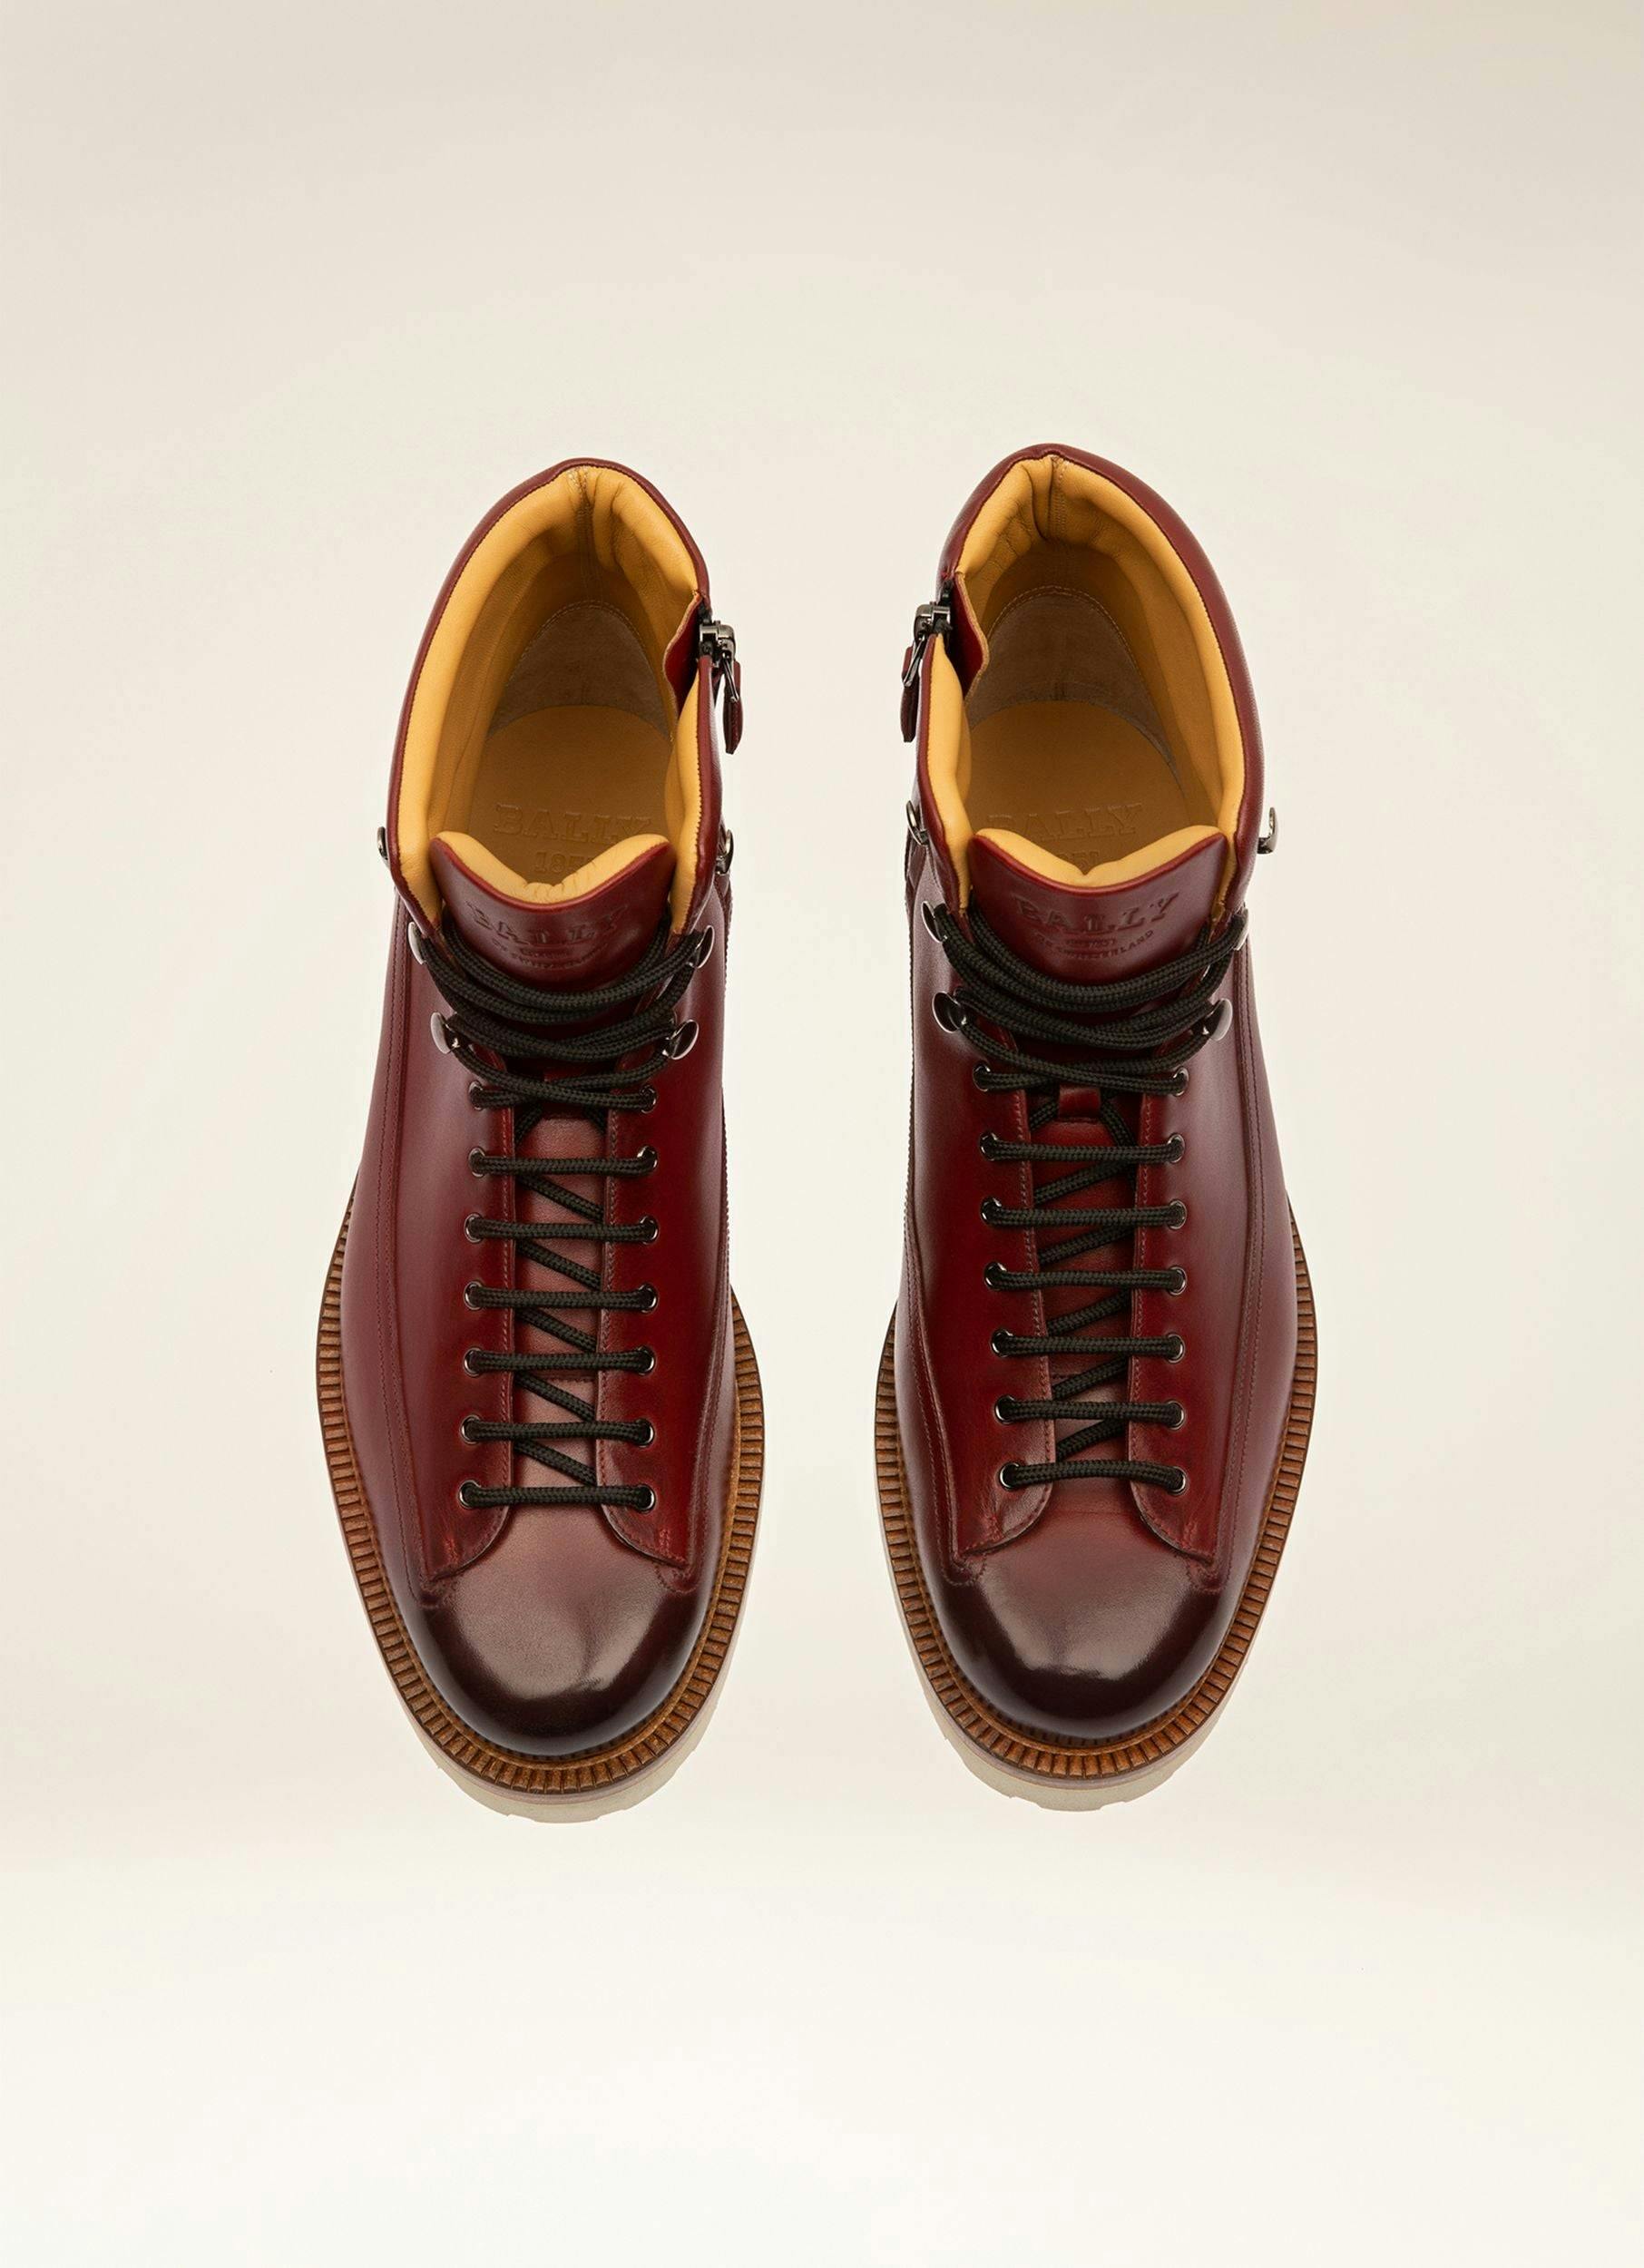 NOTTINGHAM Leather Boots In Heritage Red - Men's - Bally - 04